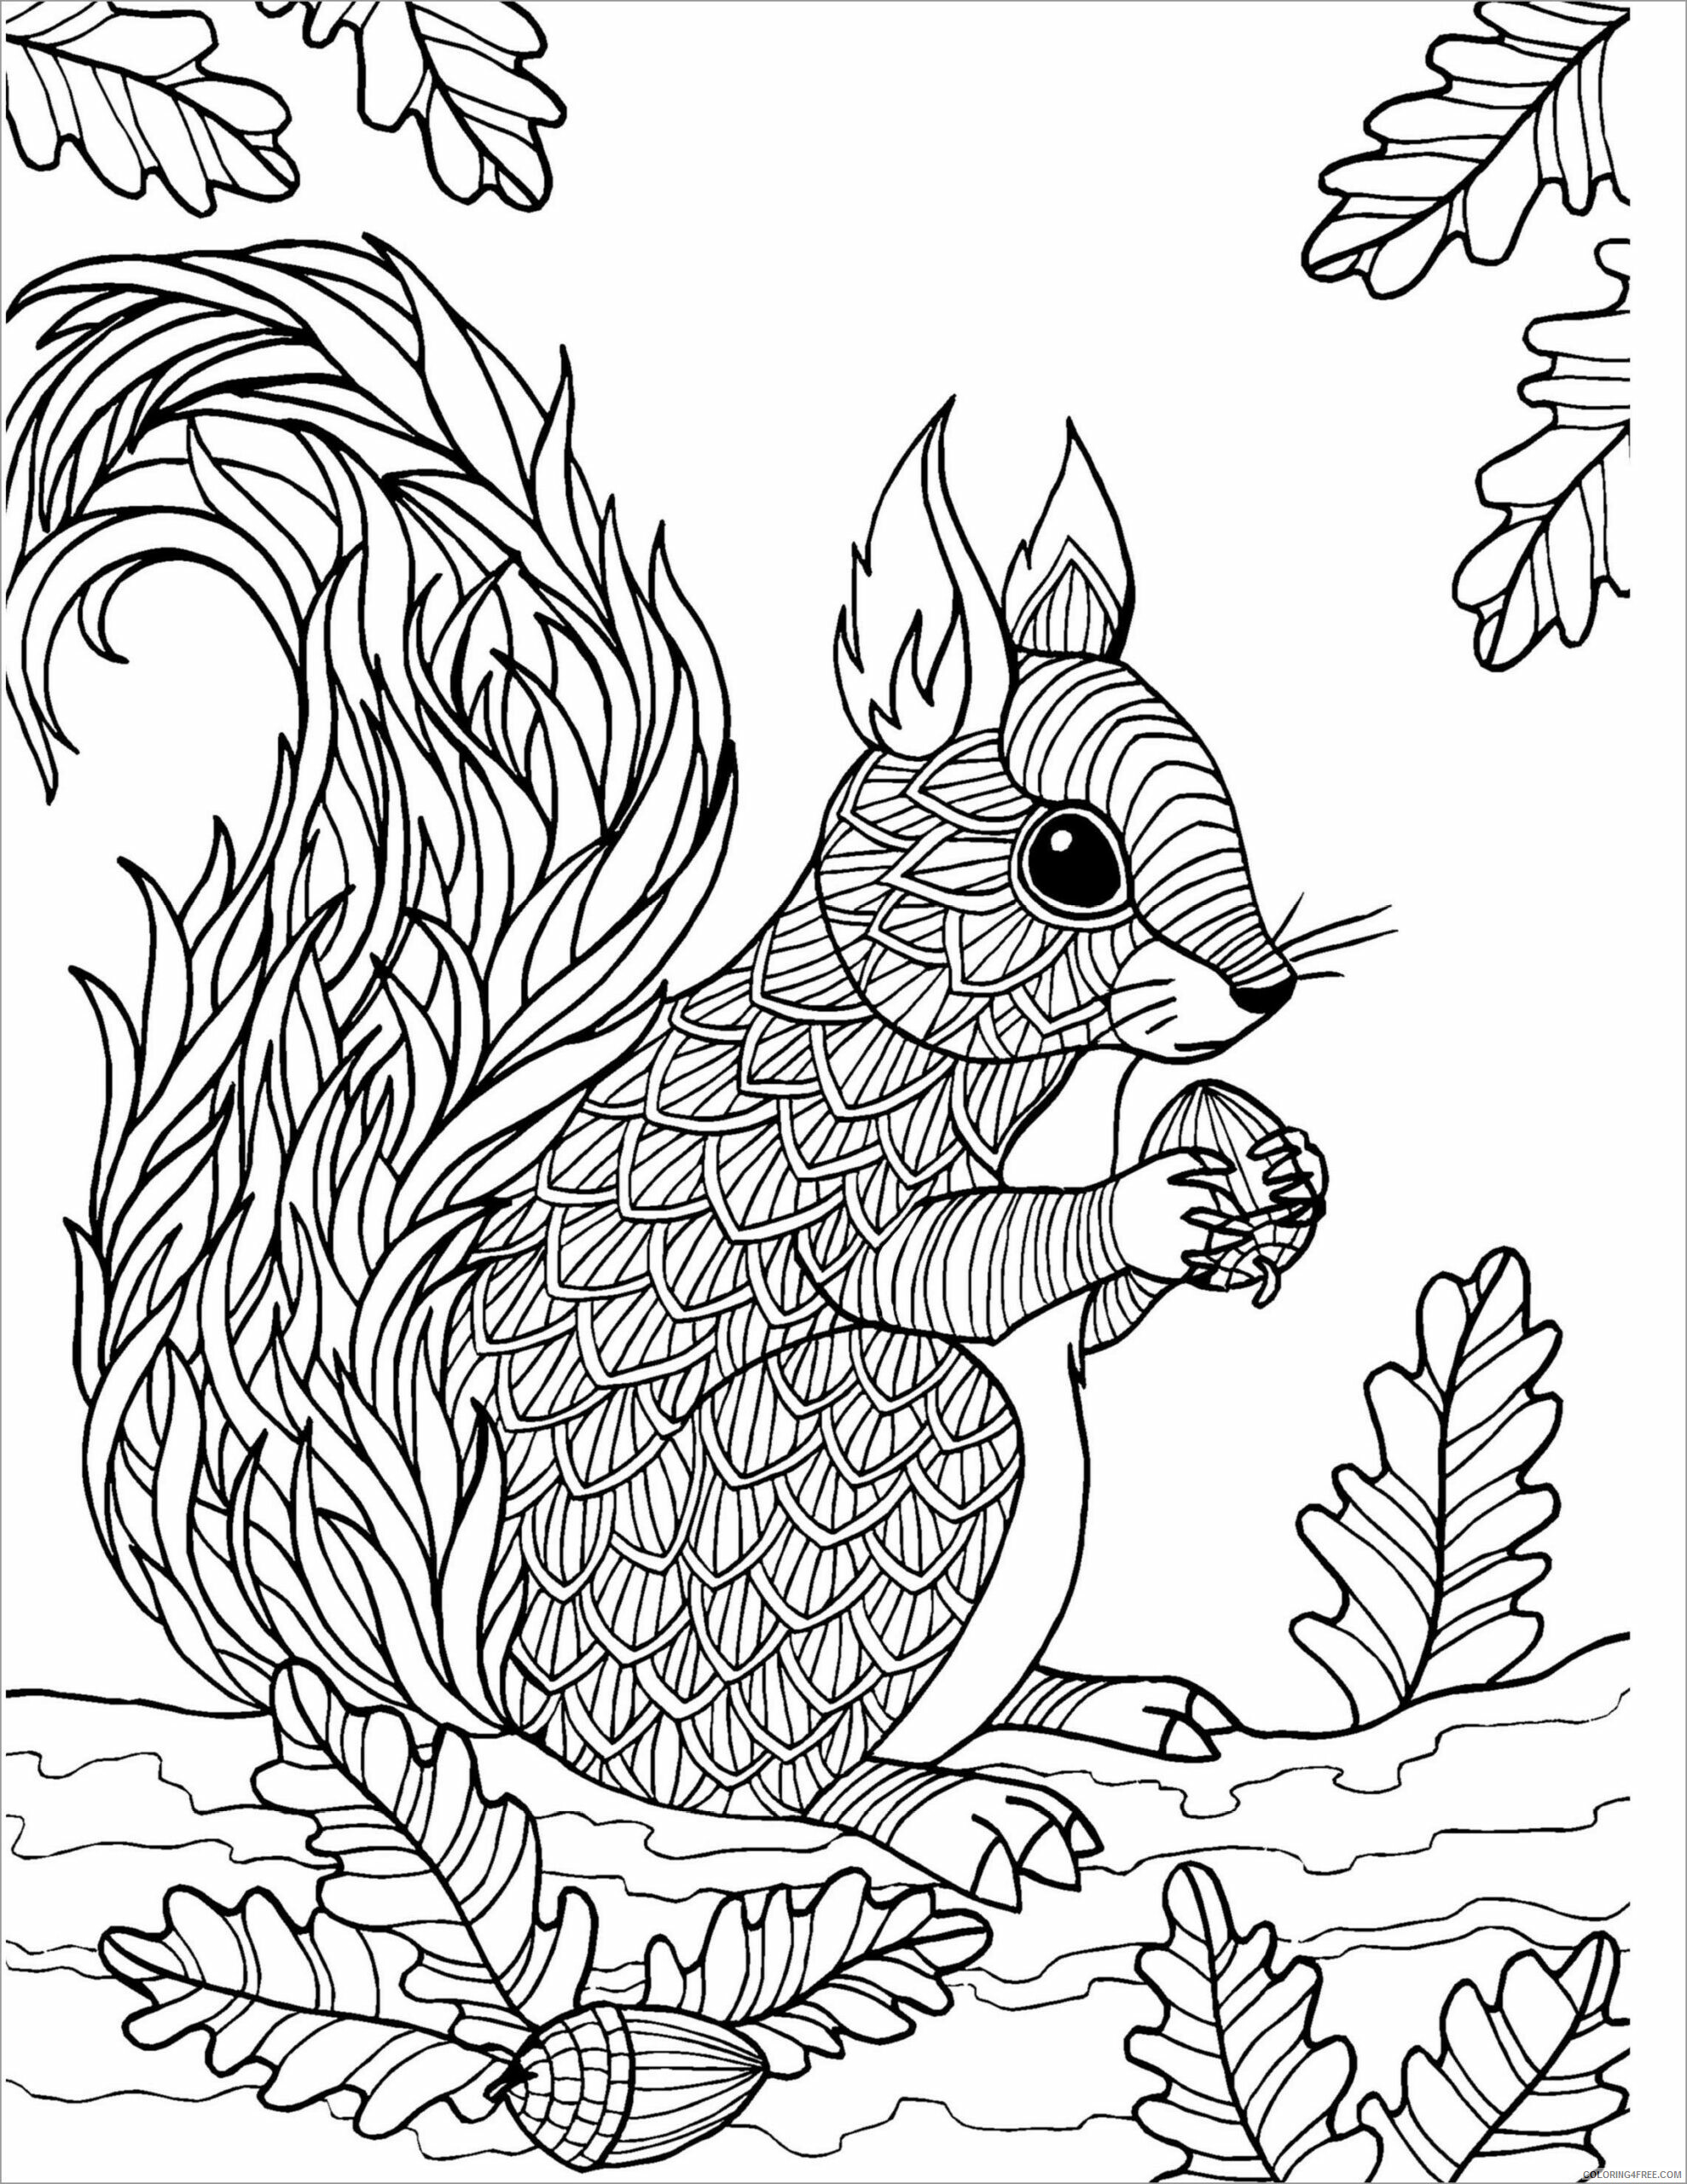 Animal Zentangle Coloring Pages zentangle squirrel for adult Printable 2020 586 Coloring4free